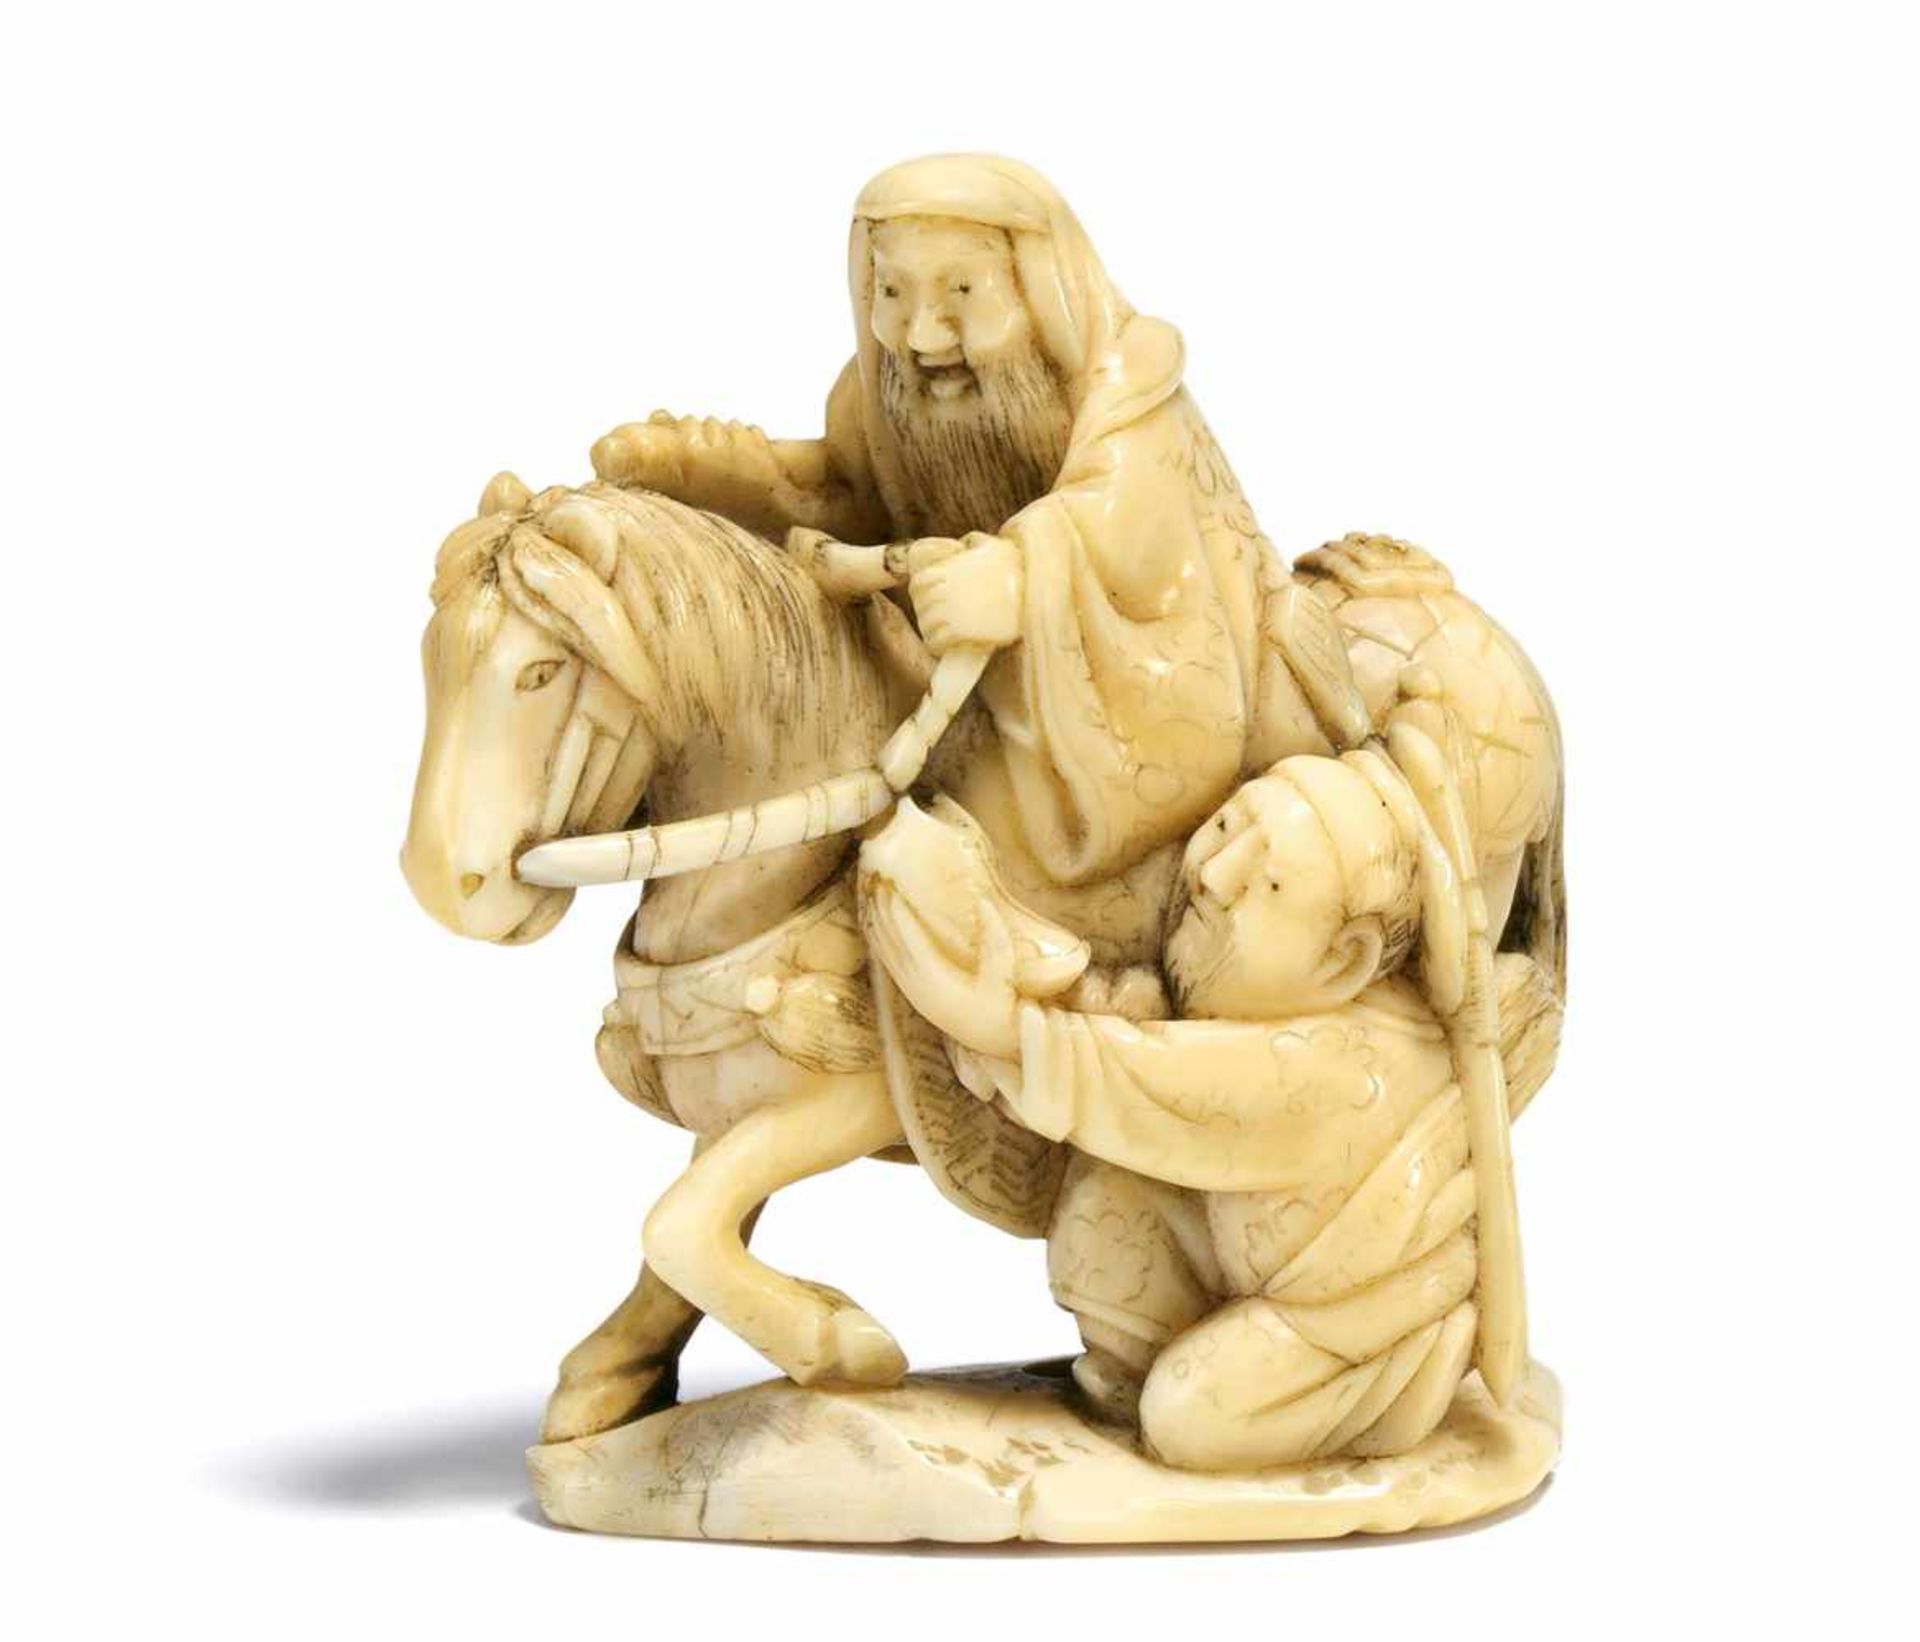 NETSUKE: KÔSEKIKÔ ON MULE AND CHÔRYÔ GIVING HIM BACK HIS LOST SHOE. Japan. 19th c. Ivory with finely